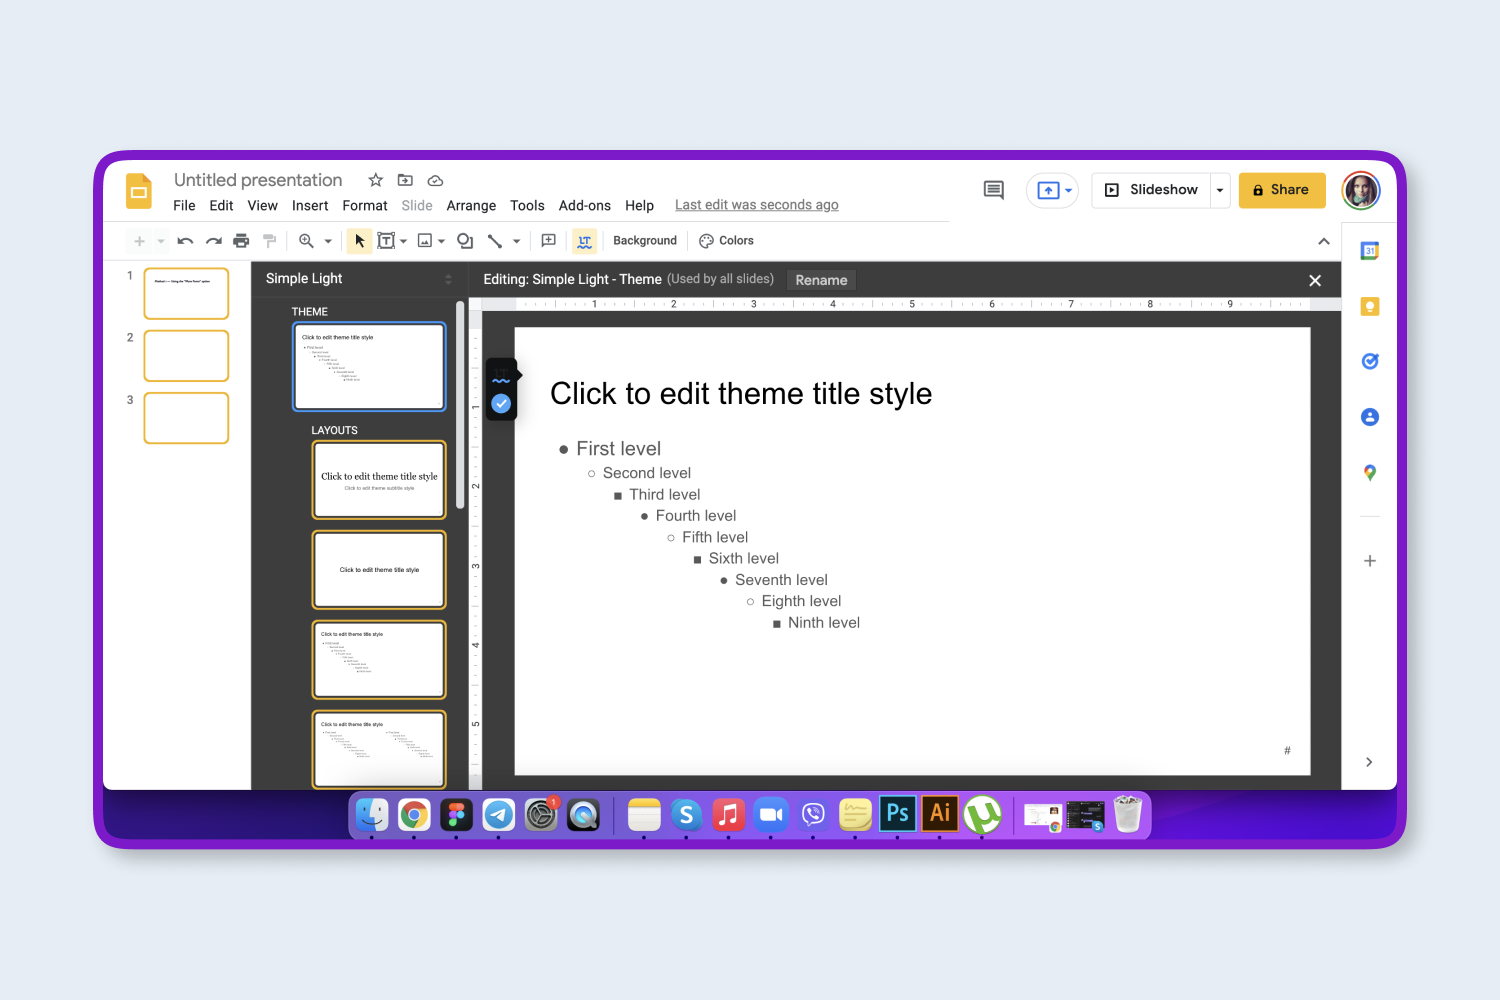 Choose the type of slide layout you want to edit. Note that each sample slide layout will show the number of slides using that template when you click it.